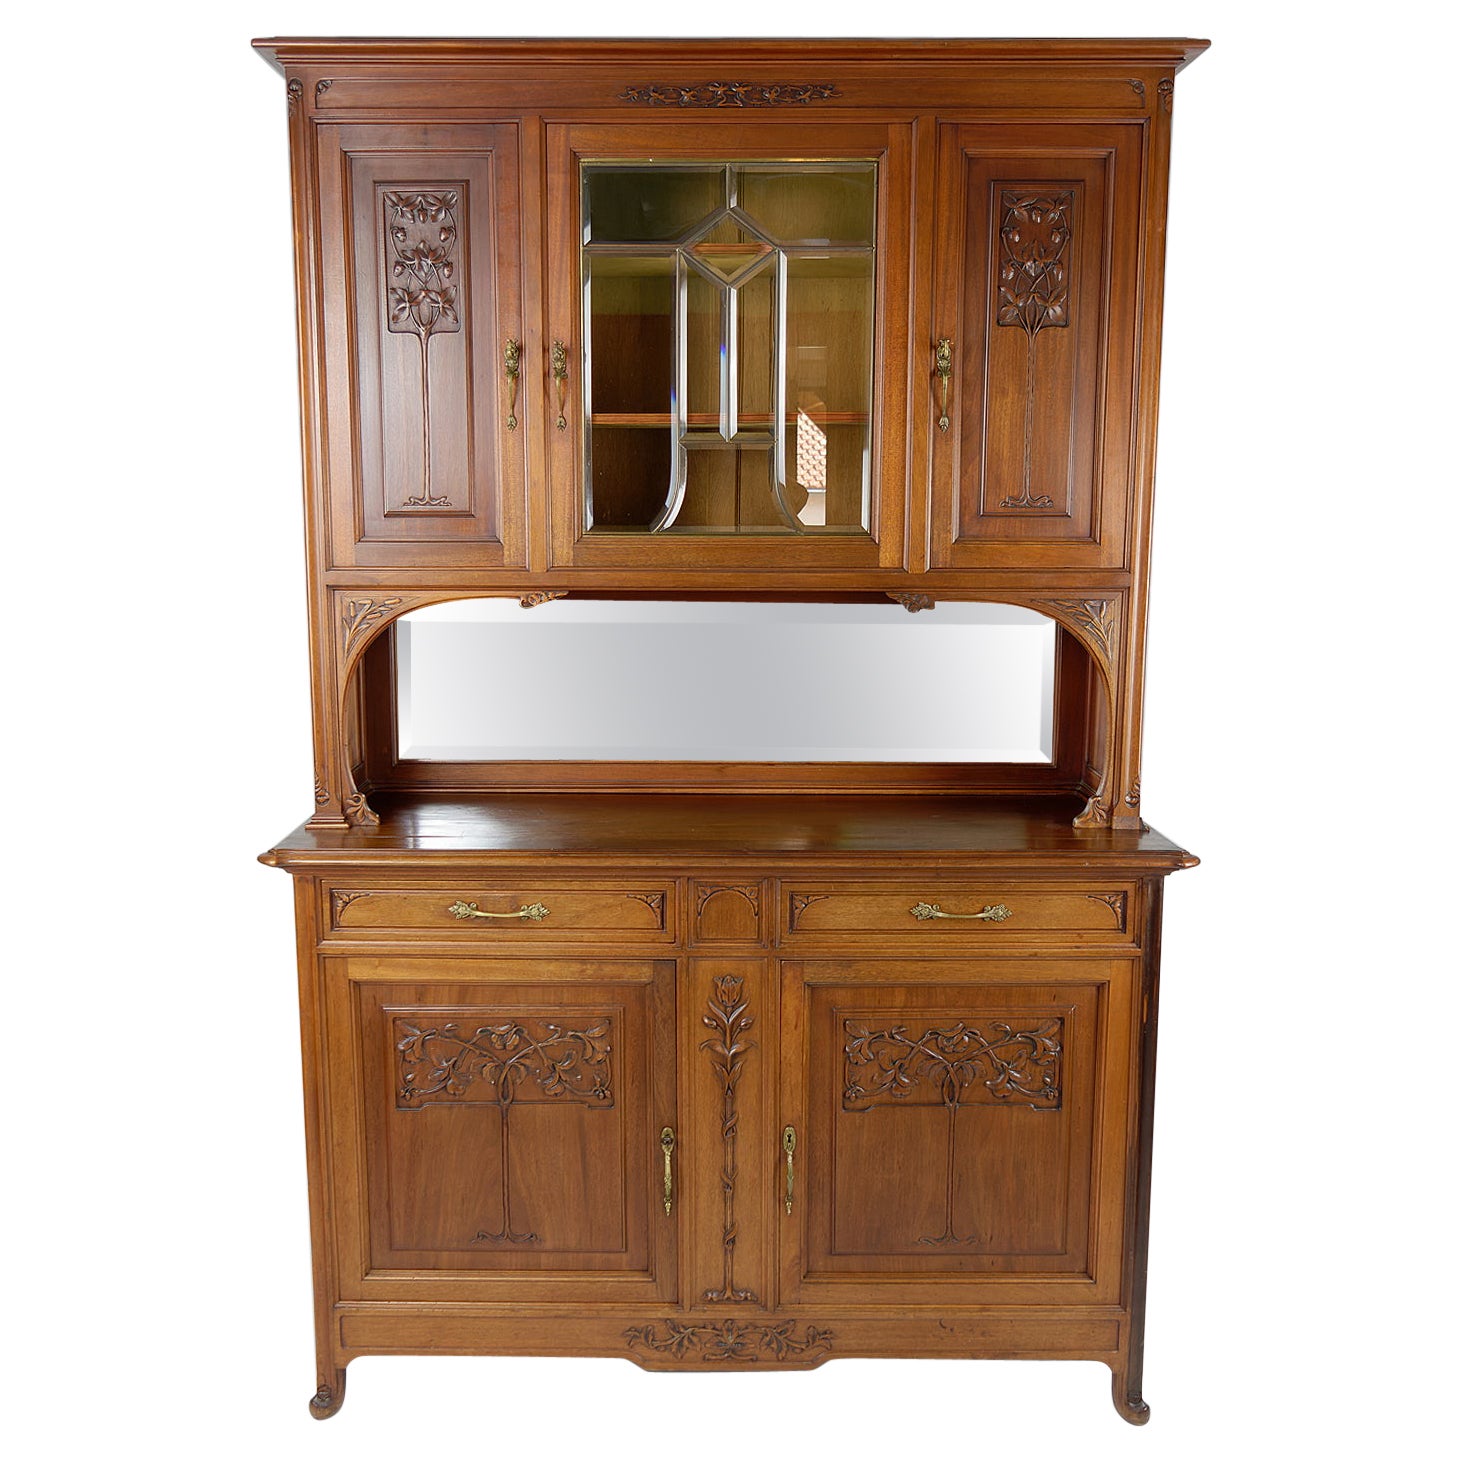 French Art Nouveau Sideboard in Carved Walnut with Stained Glass, circa 1910 For Sale